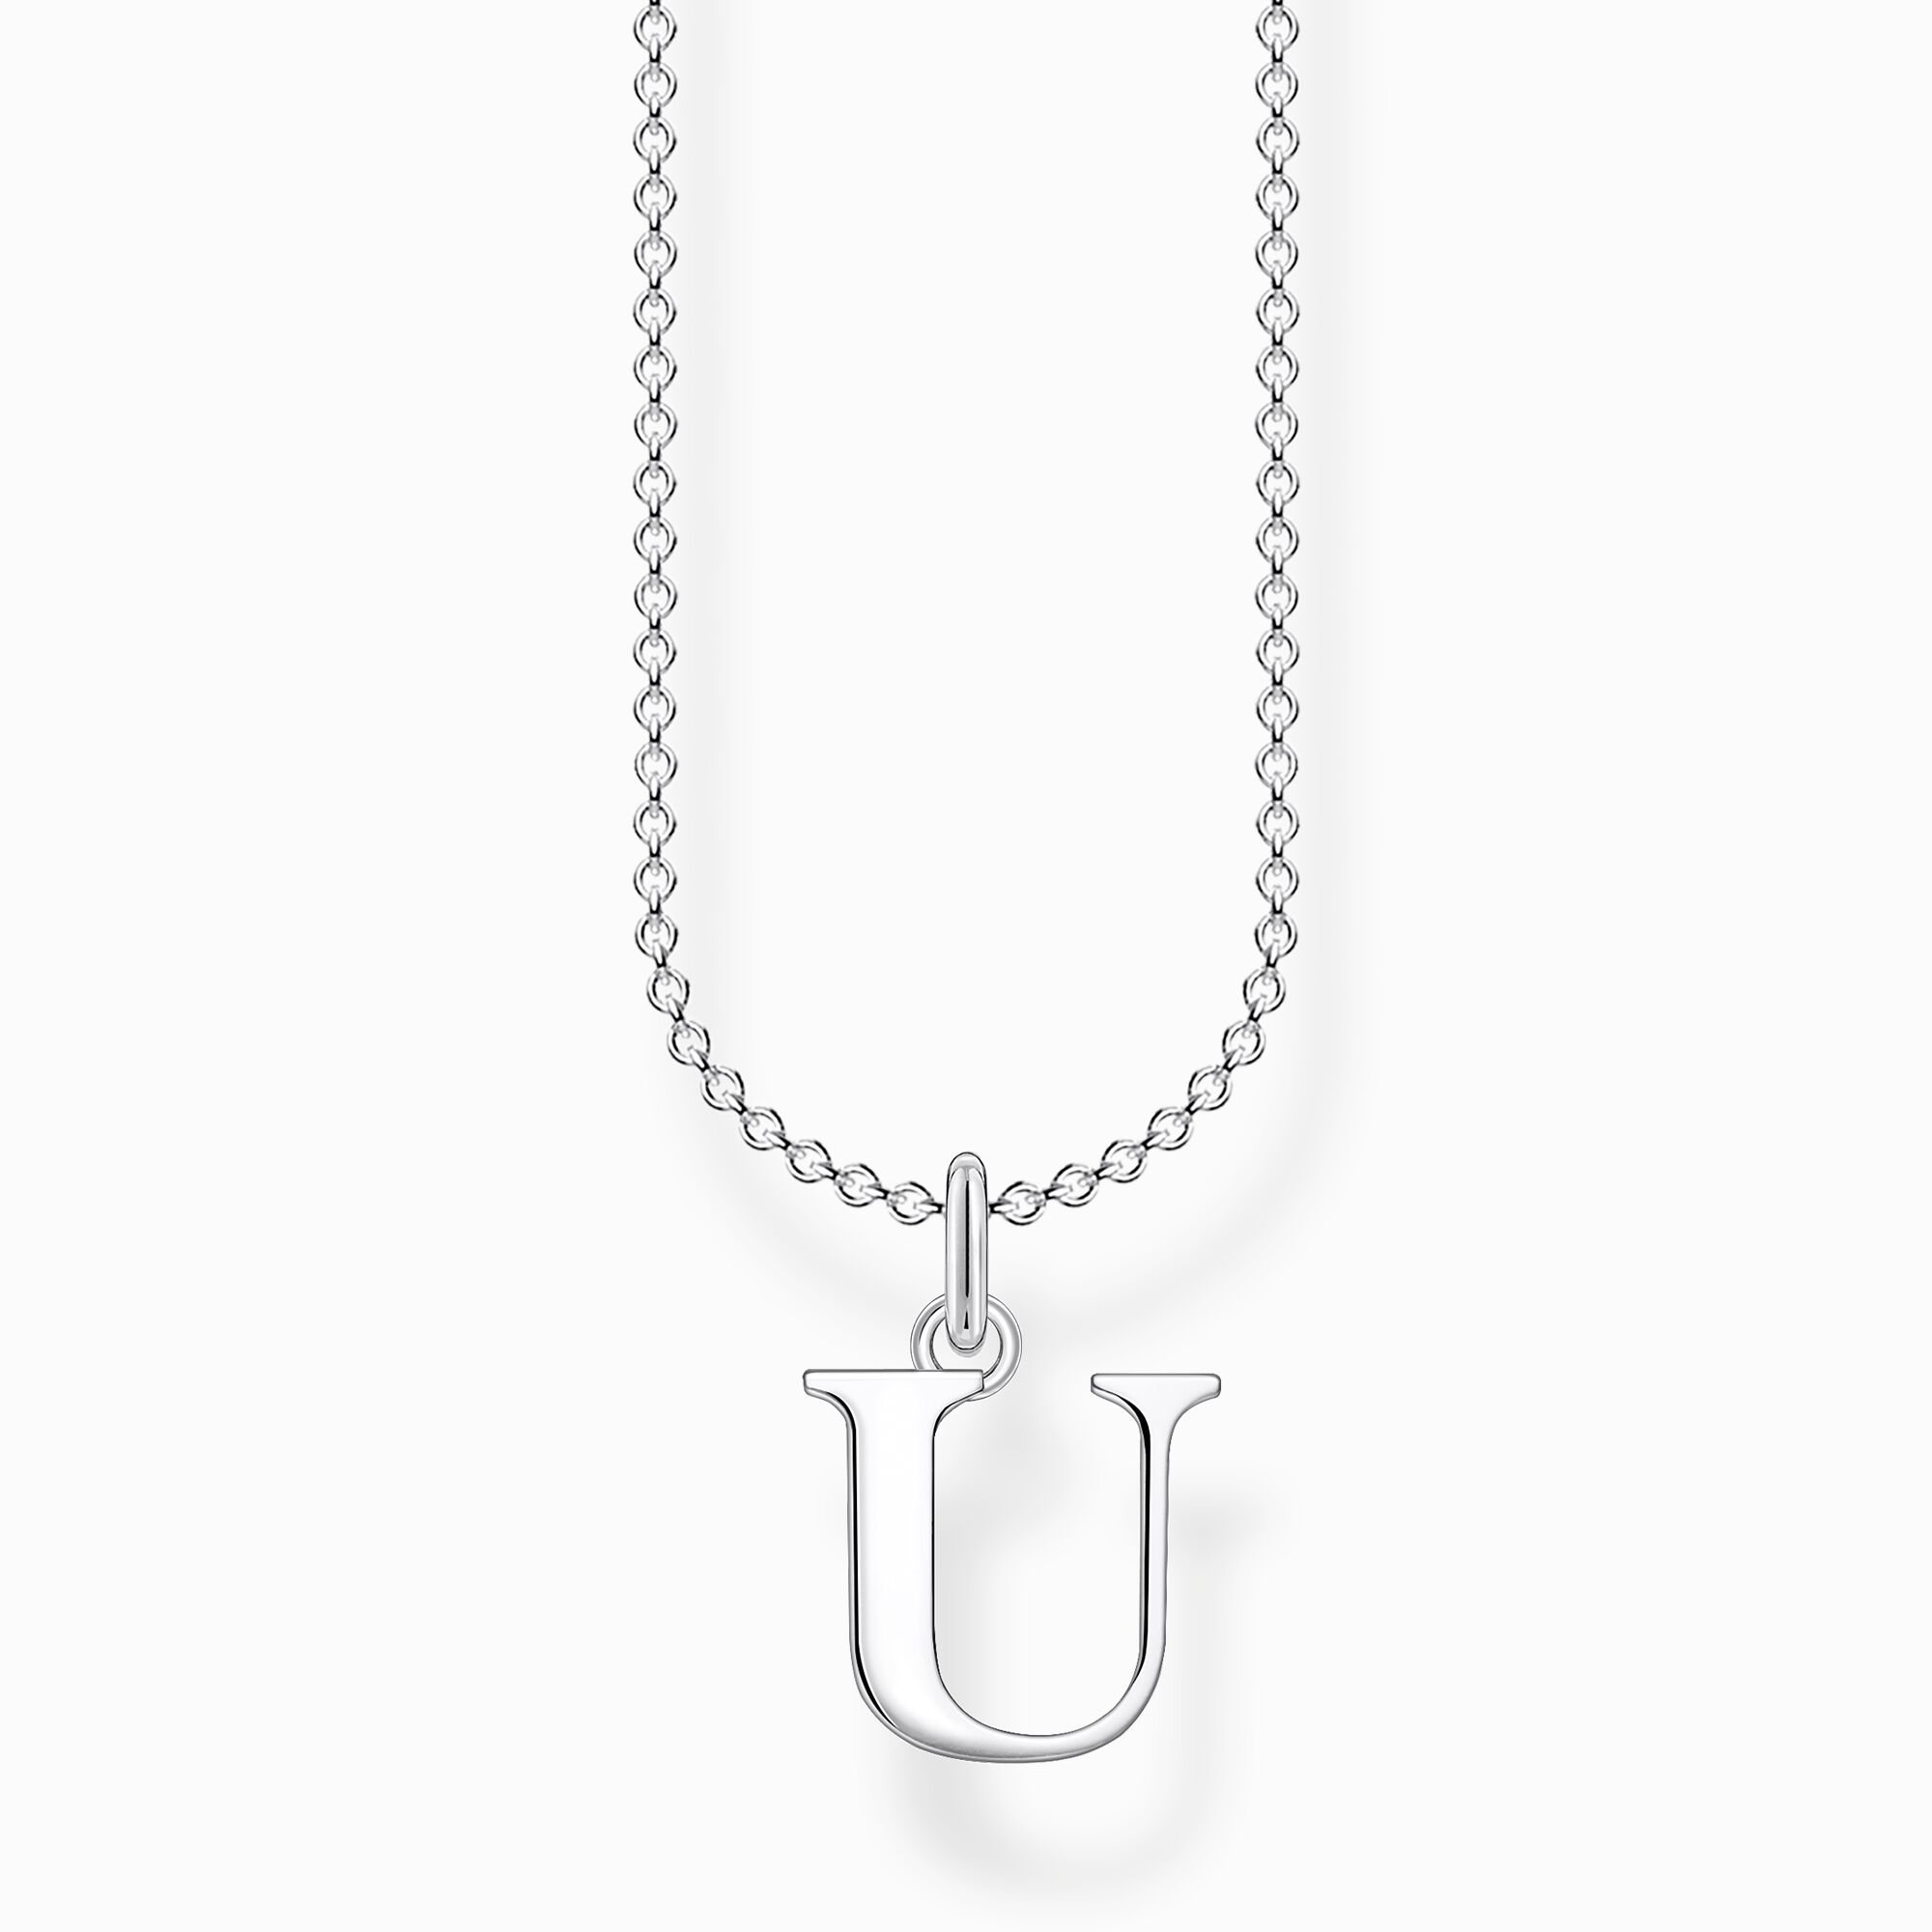 Necklace letter u from the Charming Collection collection in the THOMAS SABO online store